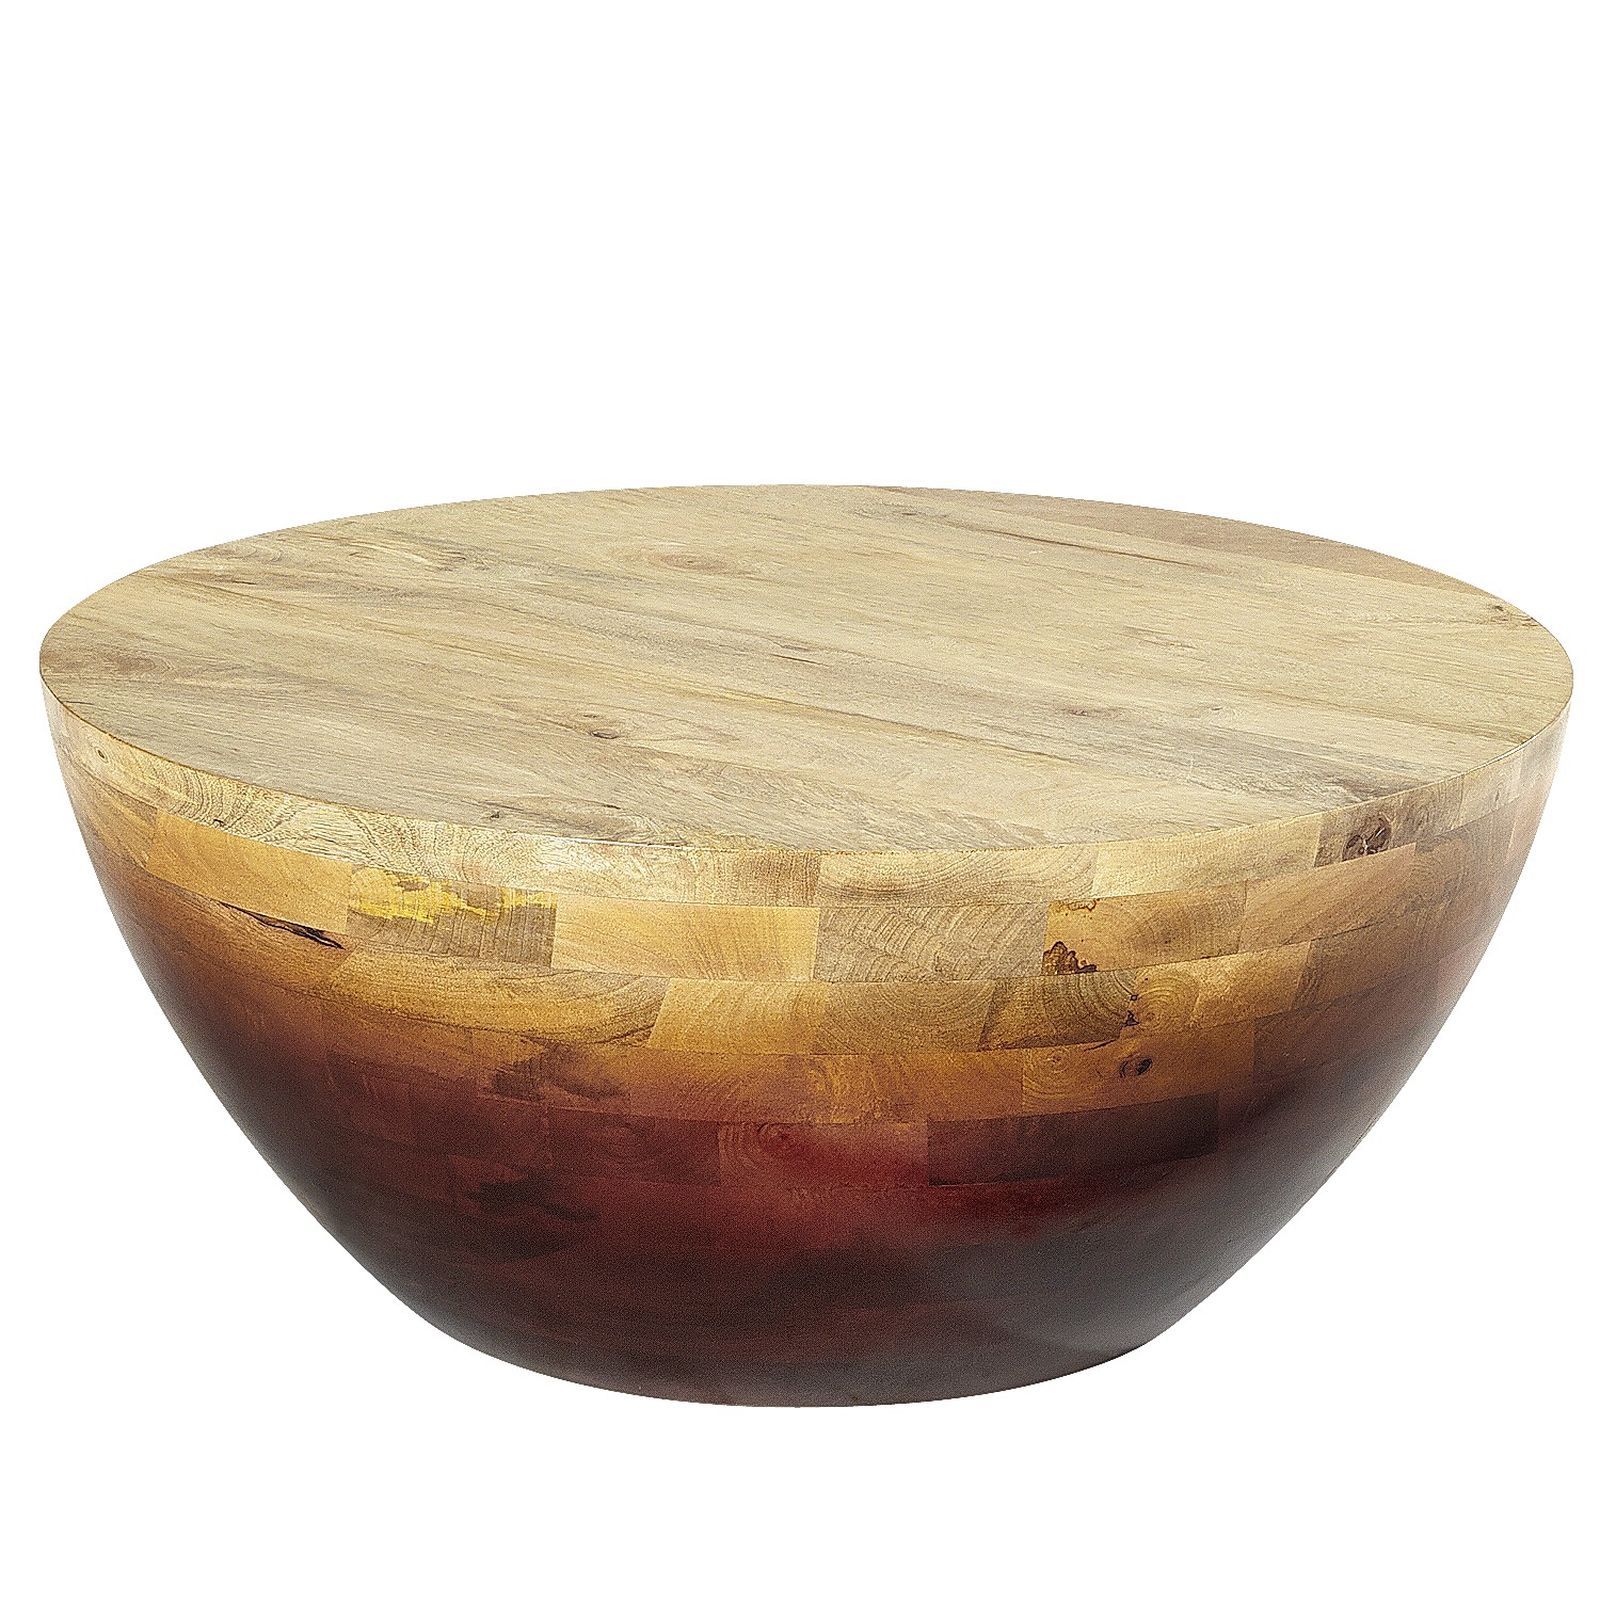 avani coffee table renie and stacey living room mango wood drum accent simple sculptural our exotic makes hand hewn each piece constructed richly grained strips that copper marble